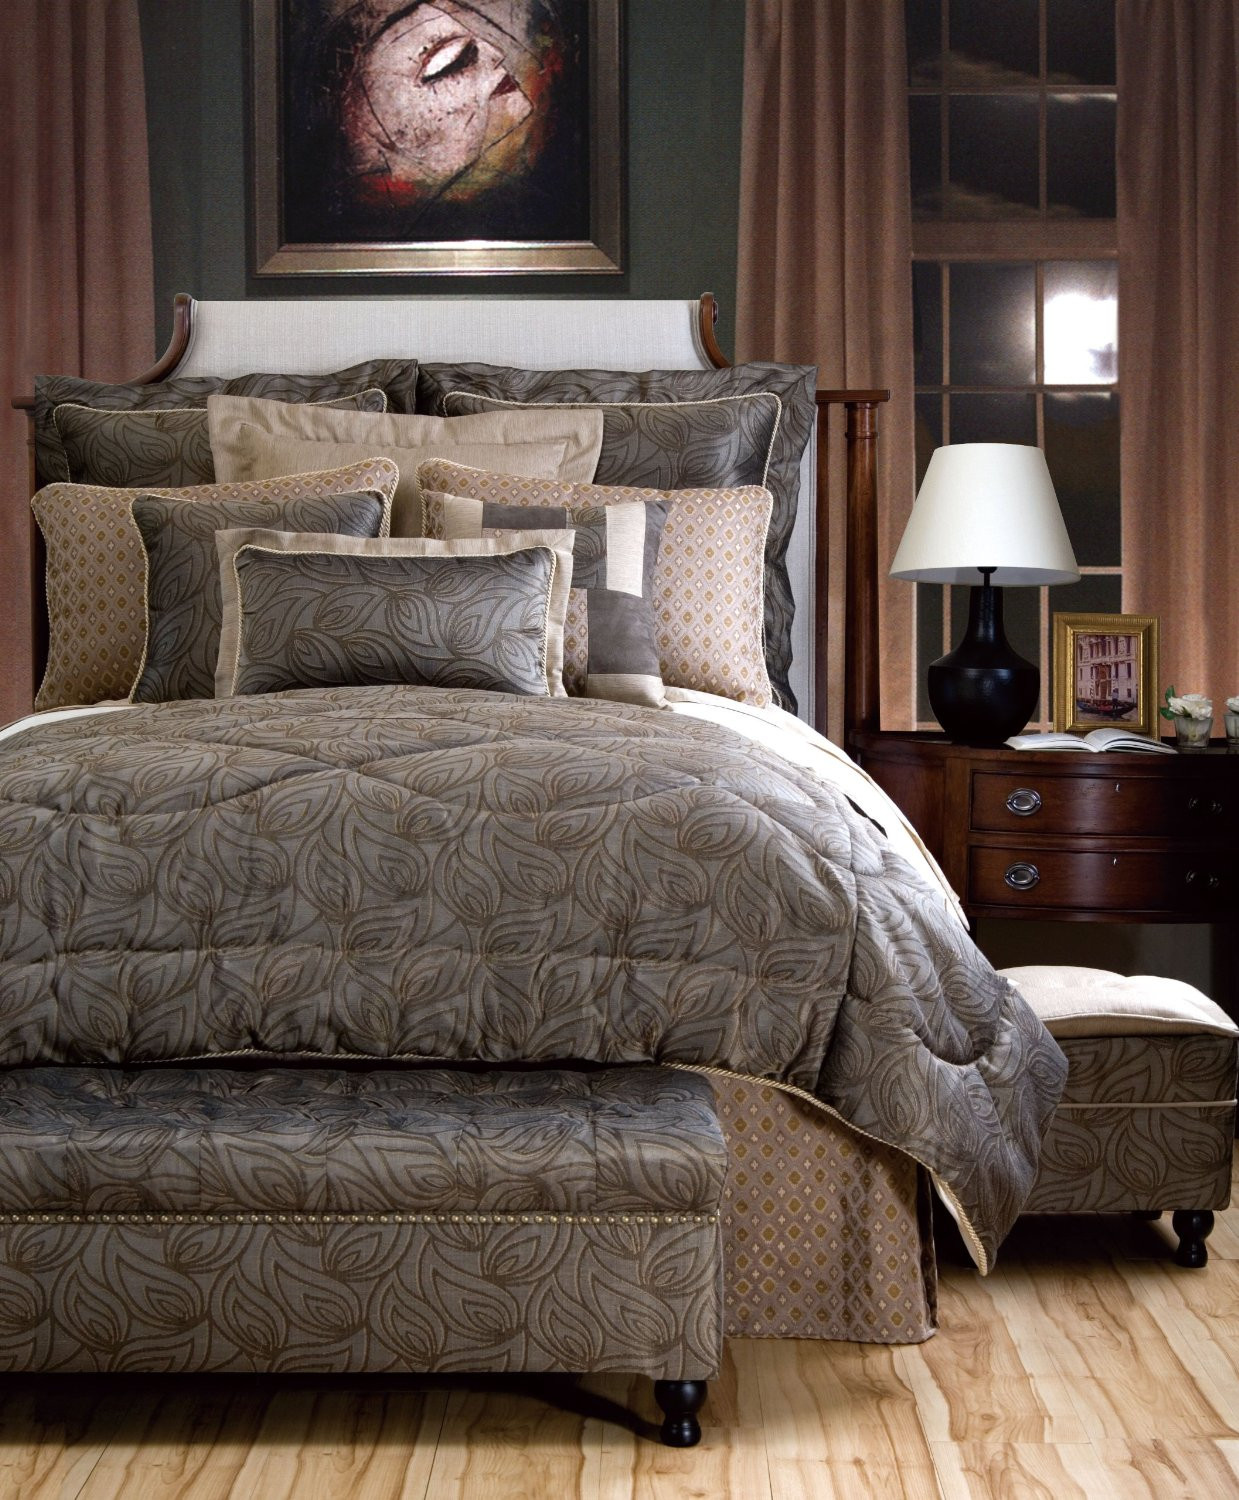 Master Bedroom Bedding Sets
 How To Create a Luxury Master Bedroom